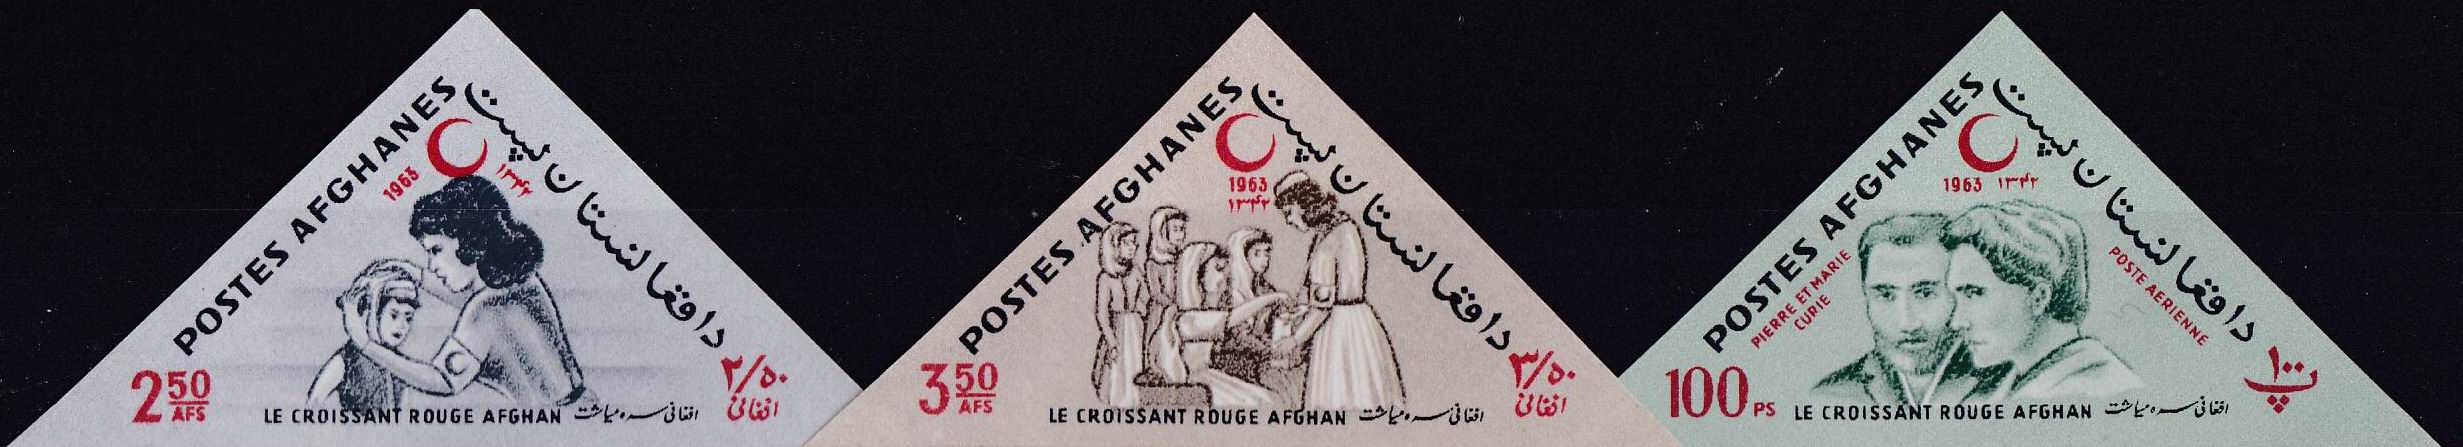 Afghanistan 1963 Stamps Red Cross Marie Curie Nobel Prize Cancer